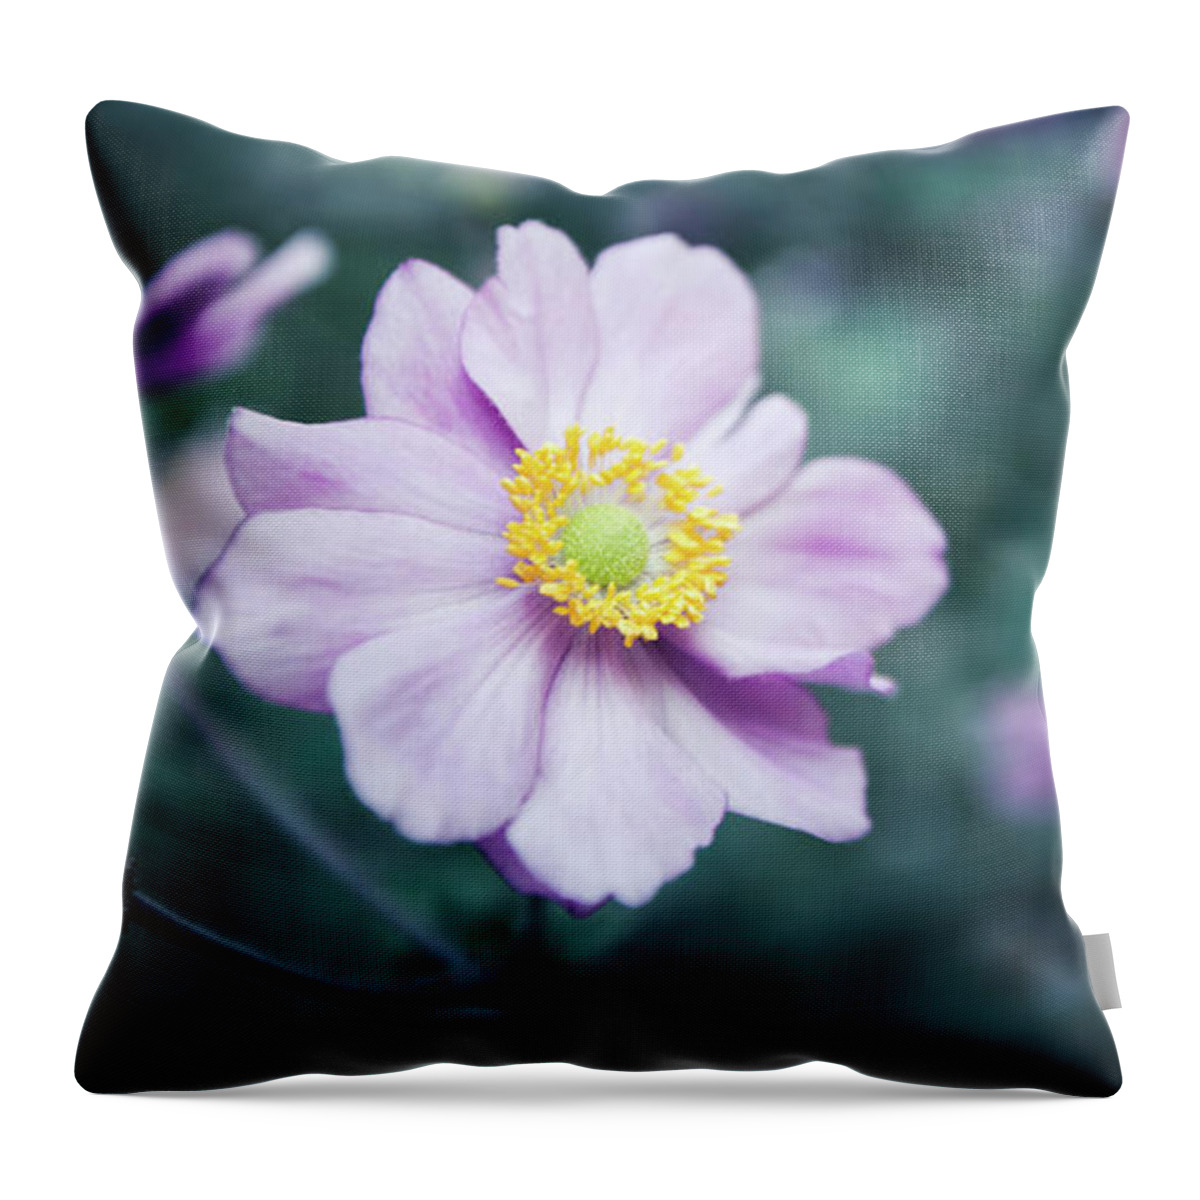 2x1 Throw Pillow featuring the photograph Natural Beauty by Hannes Cmarits